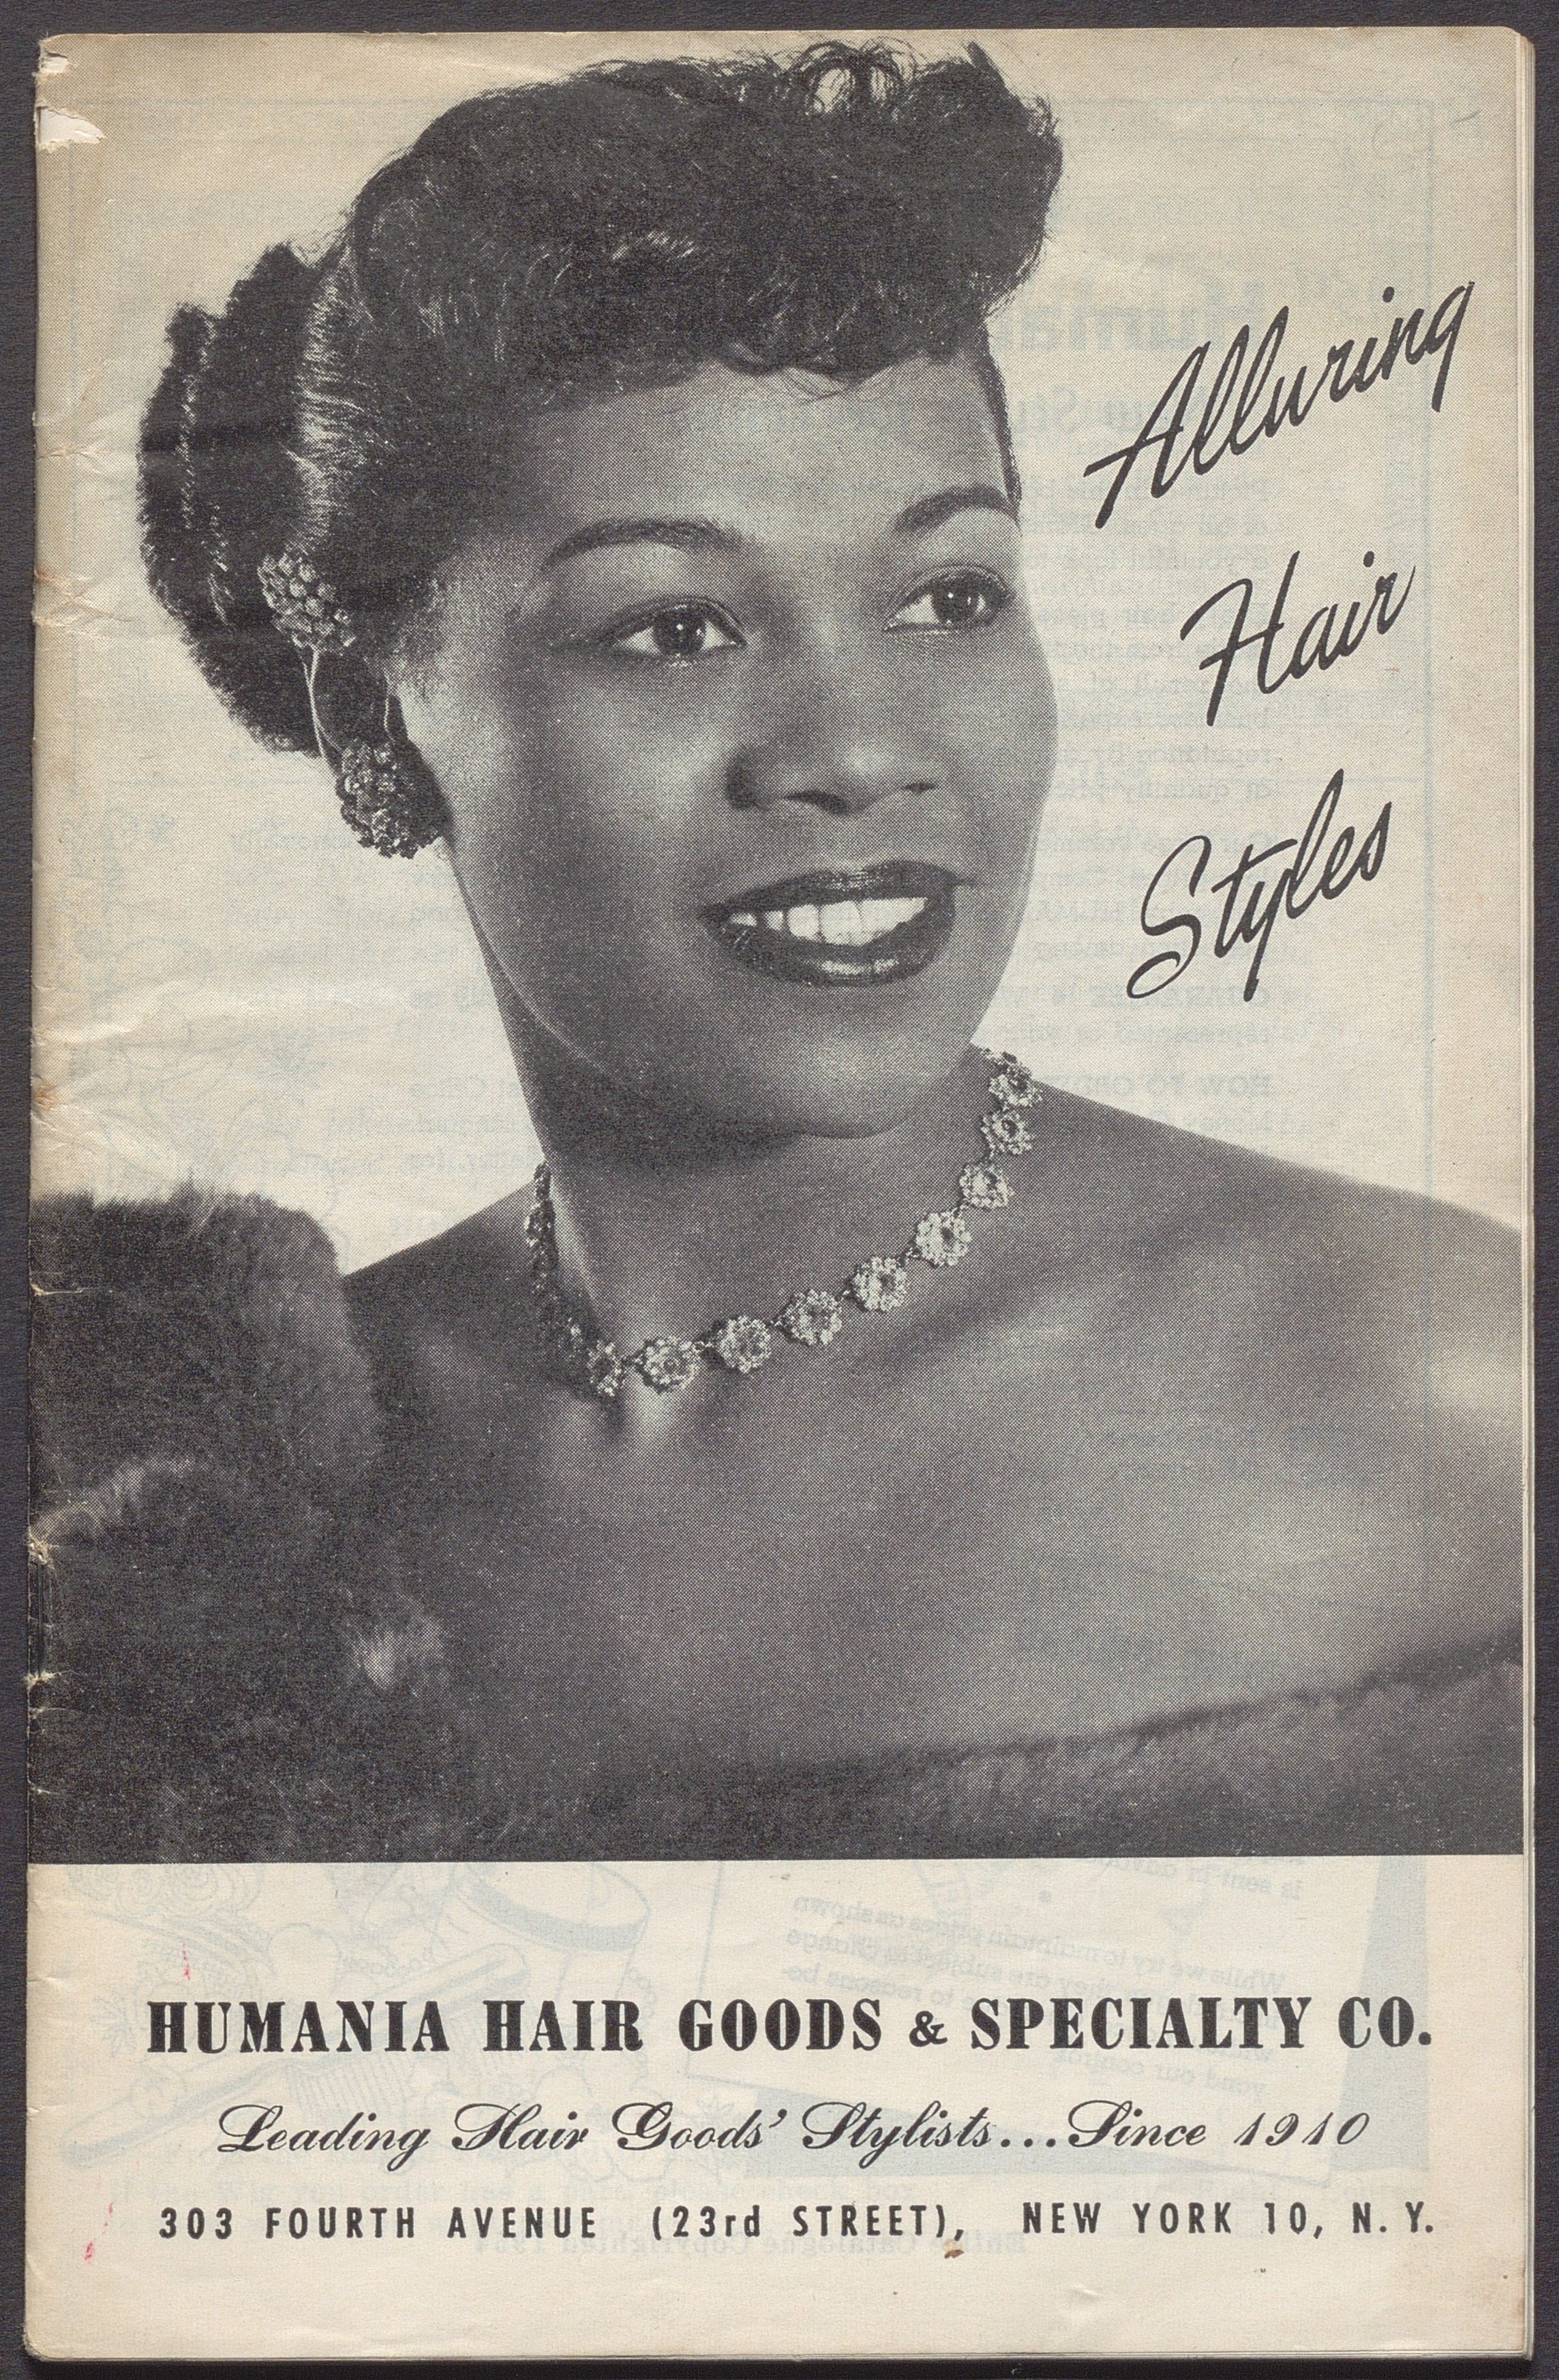 Cover of a wig catalog targeted to Black consumers, showing a photograph of a glamorous woman.